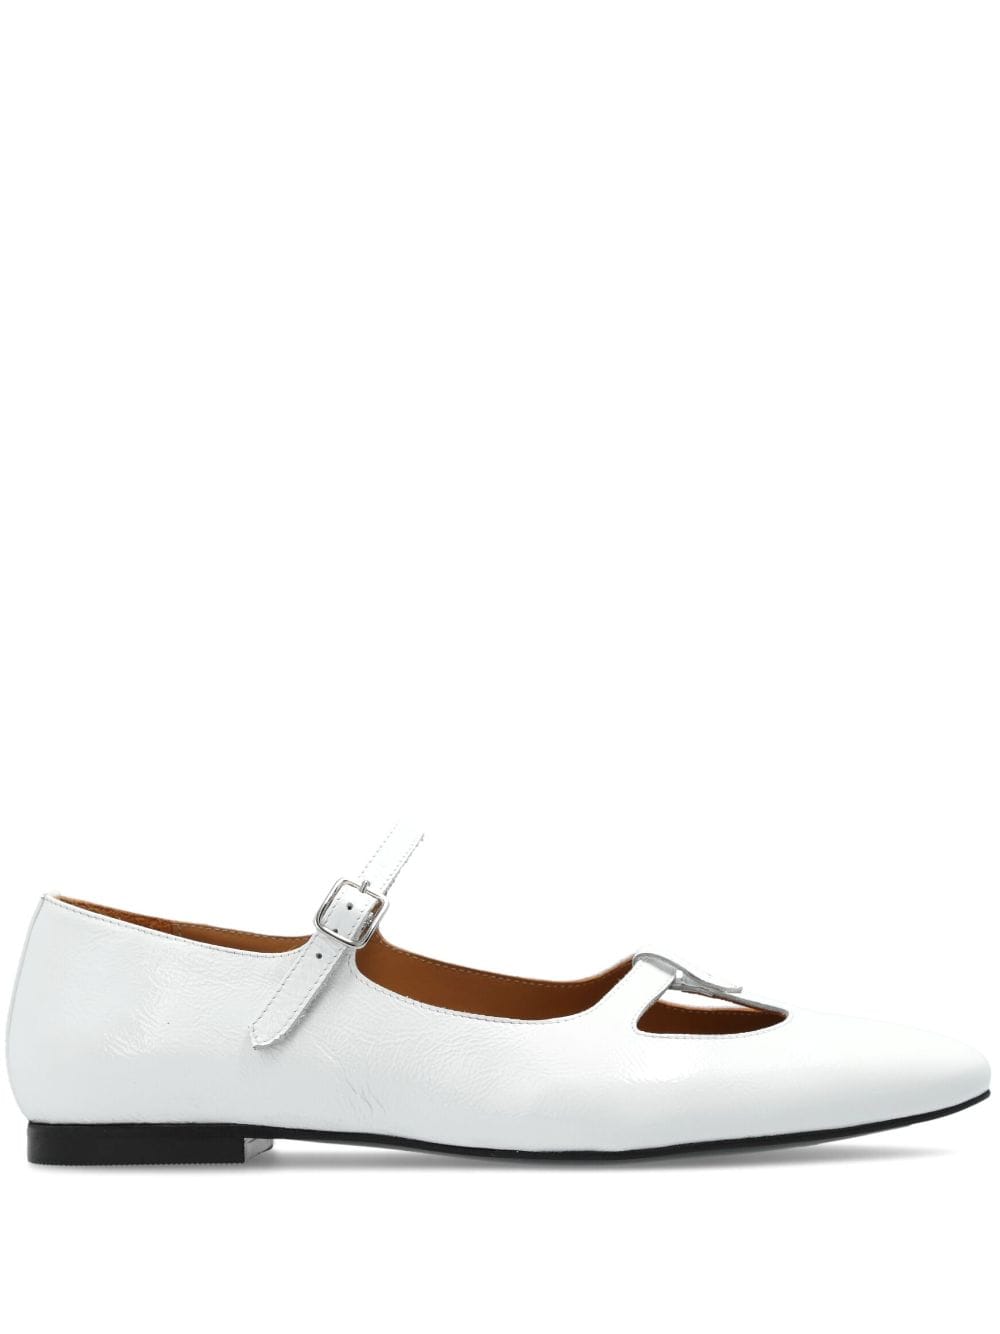 A.P.C. Katie leather ballerina shoes - Bianco